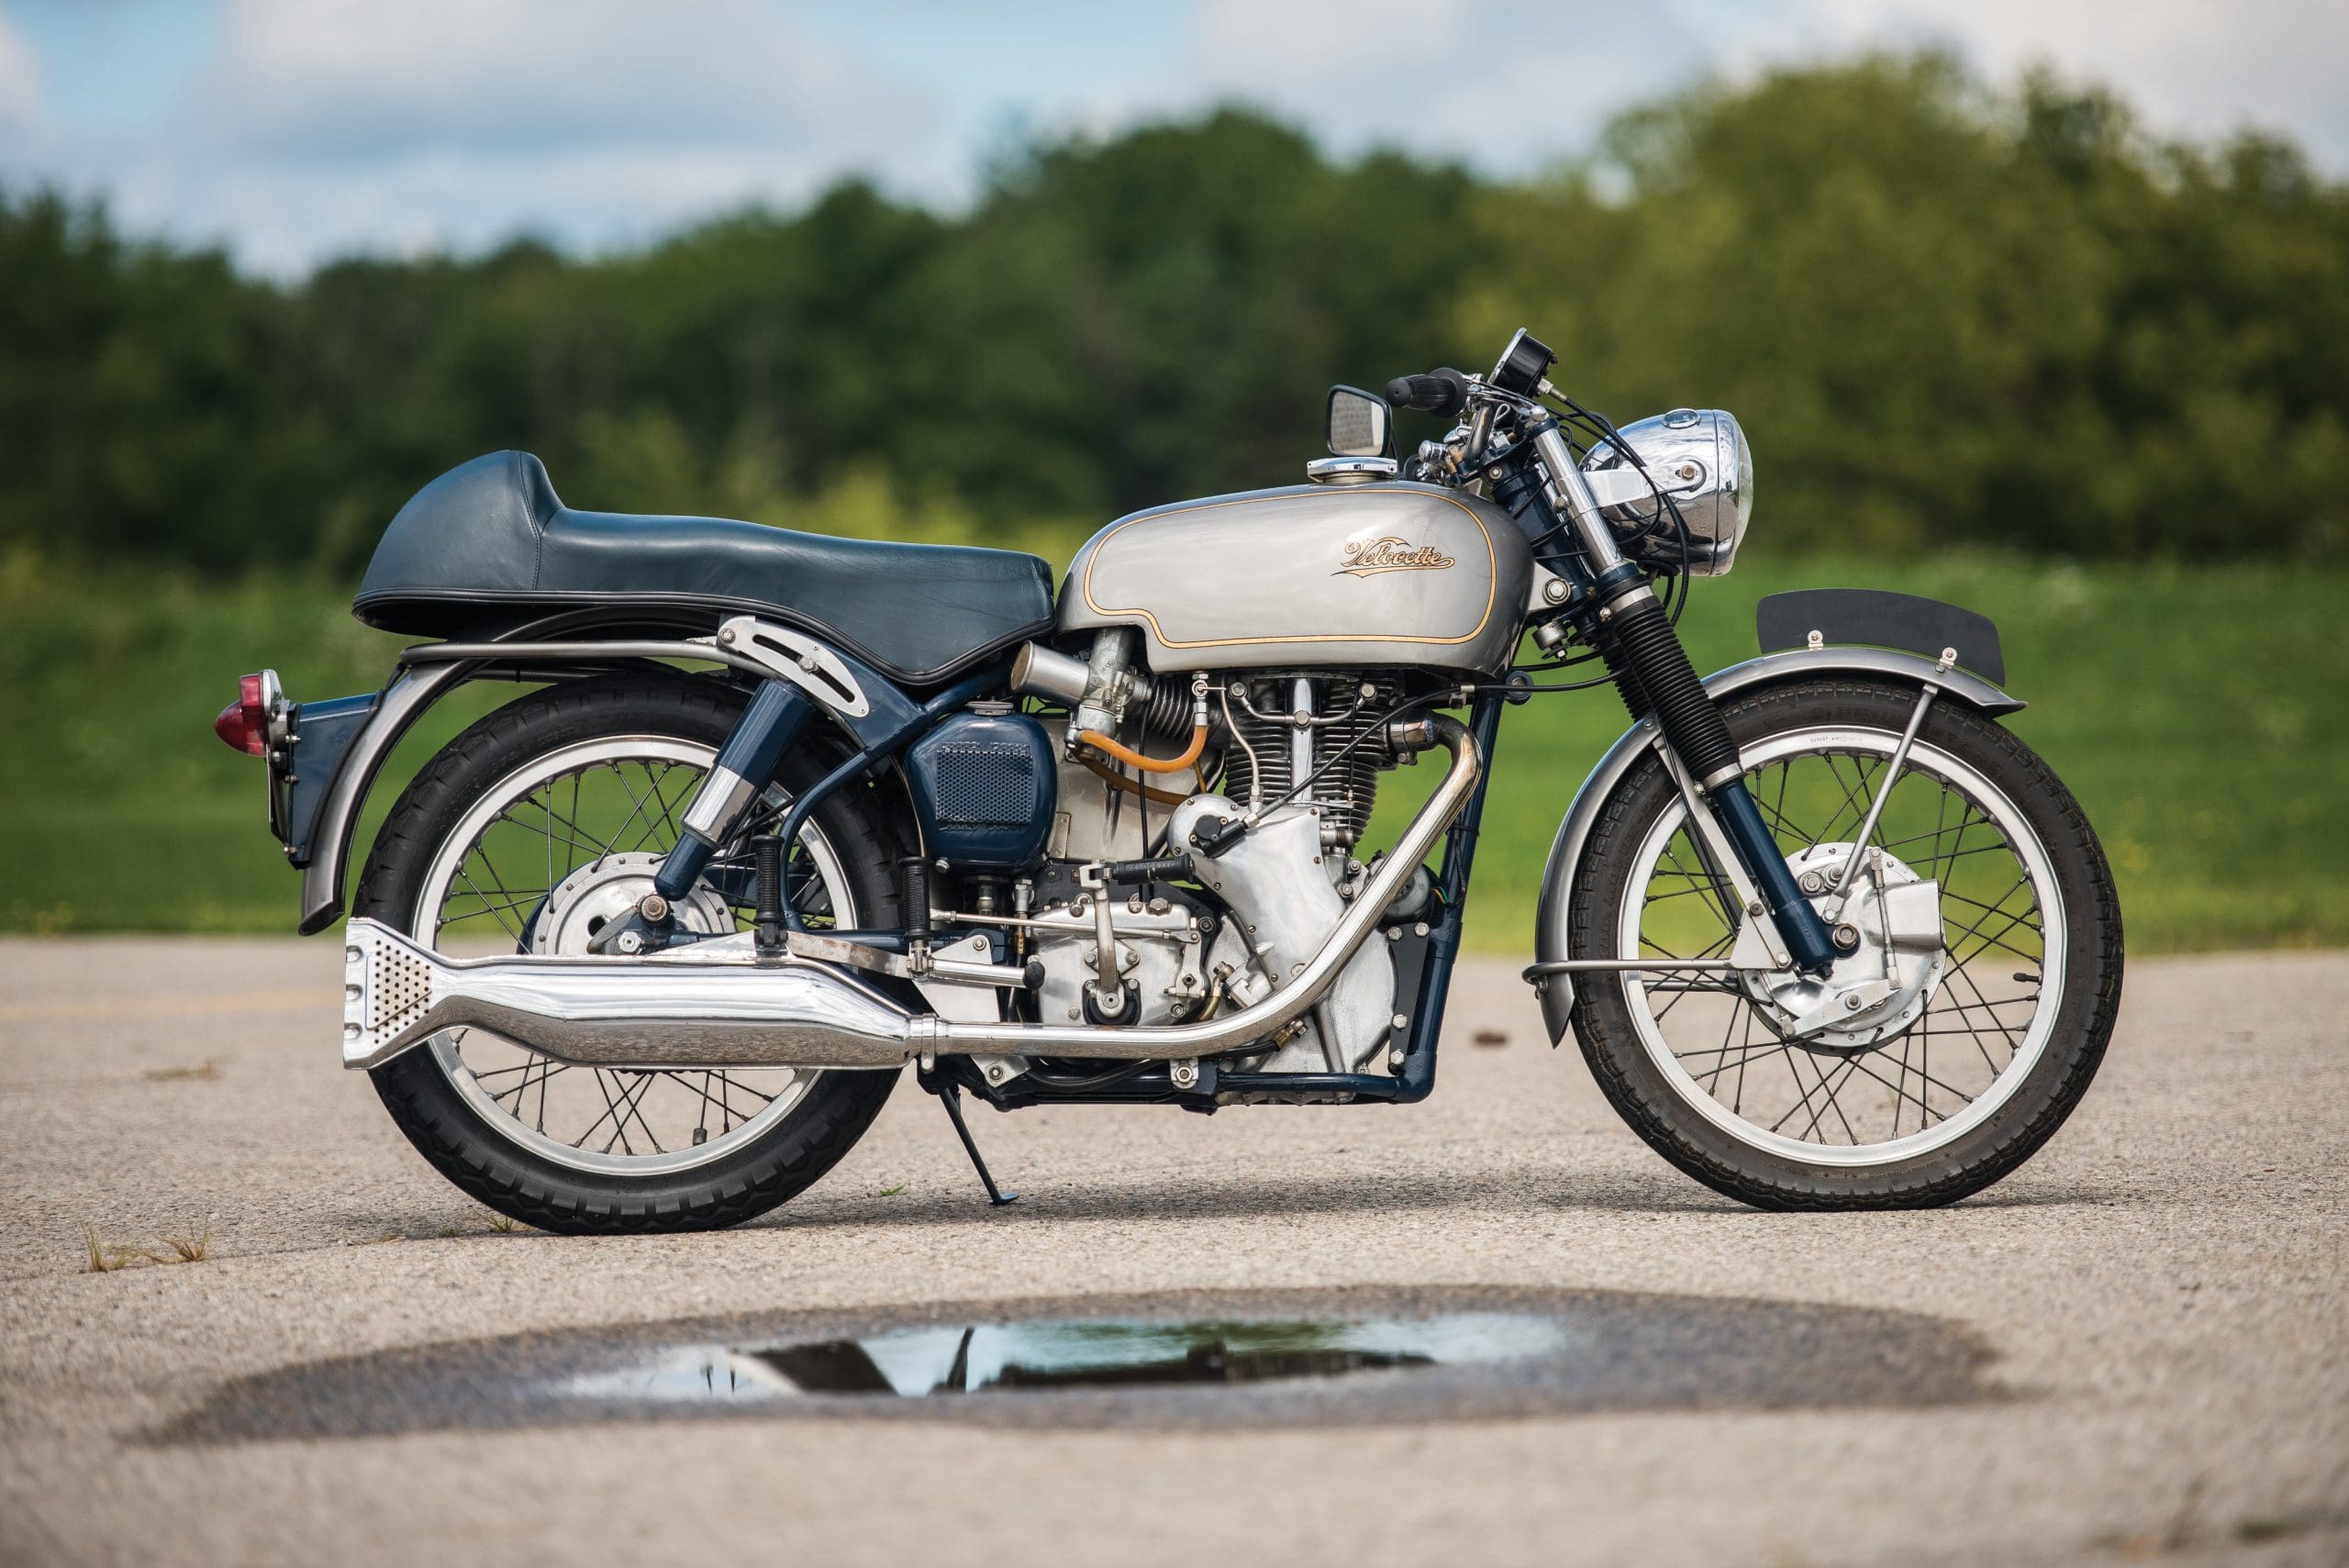 a Velocette Venom motorcycle from the 1960s